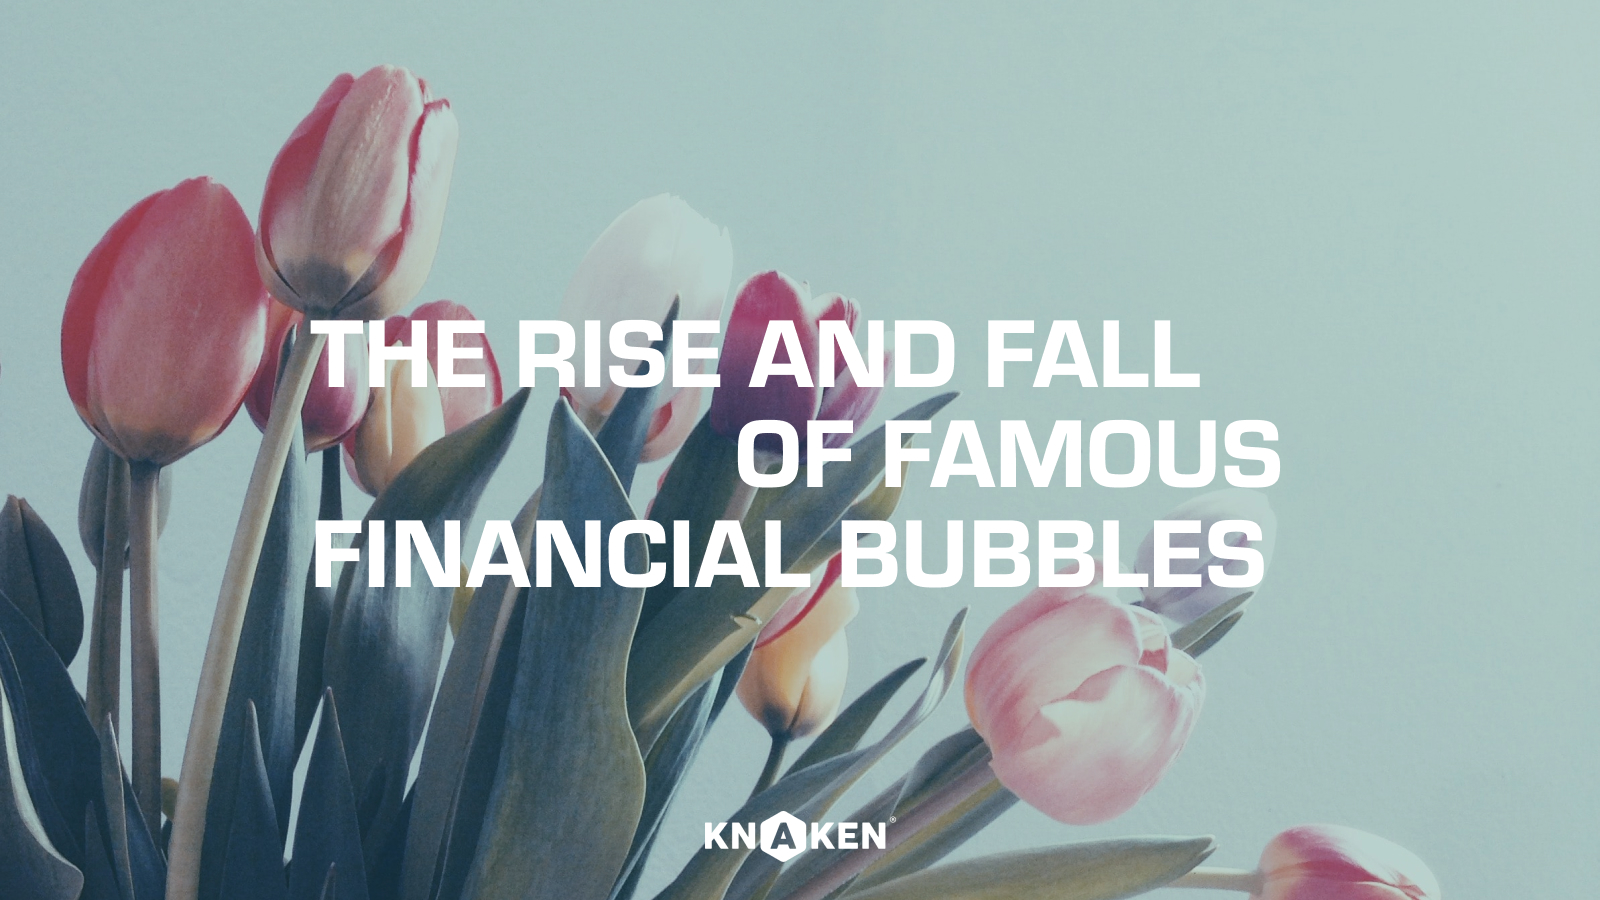 The rise and fall of famous financial bubbles.